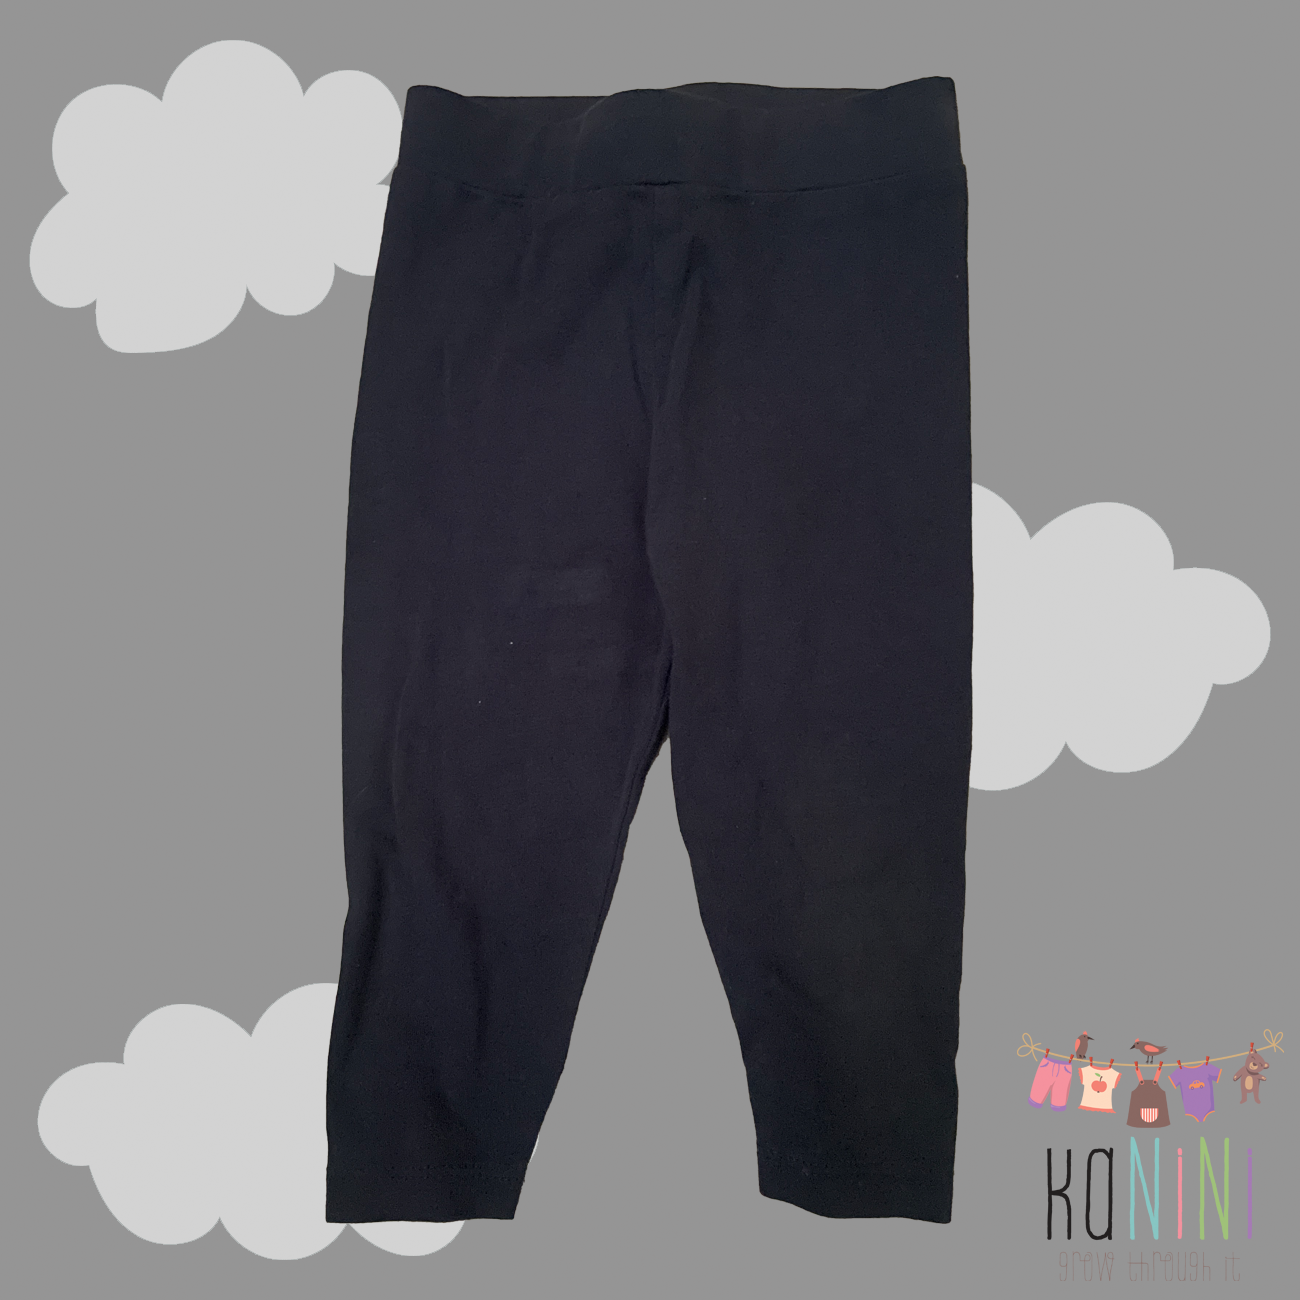 Featured image for “Keedo 3 - 6 Months Unisex Navy Leggings”